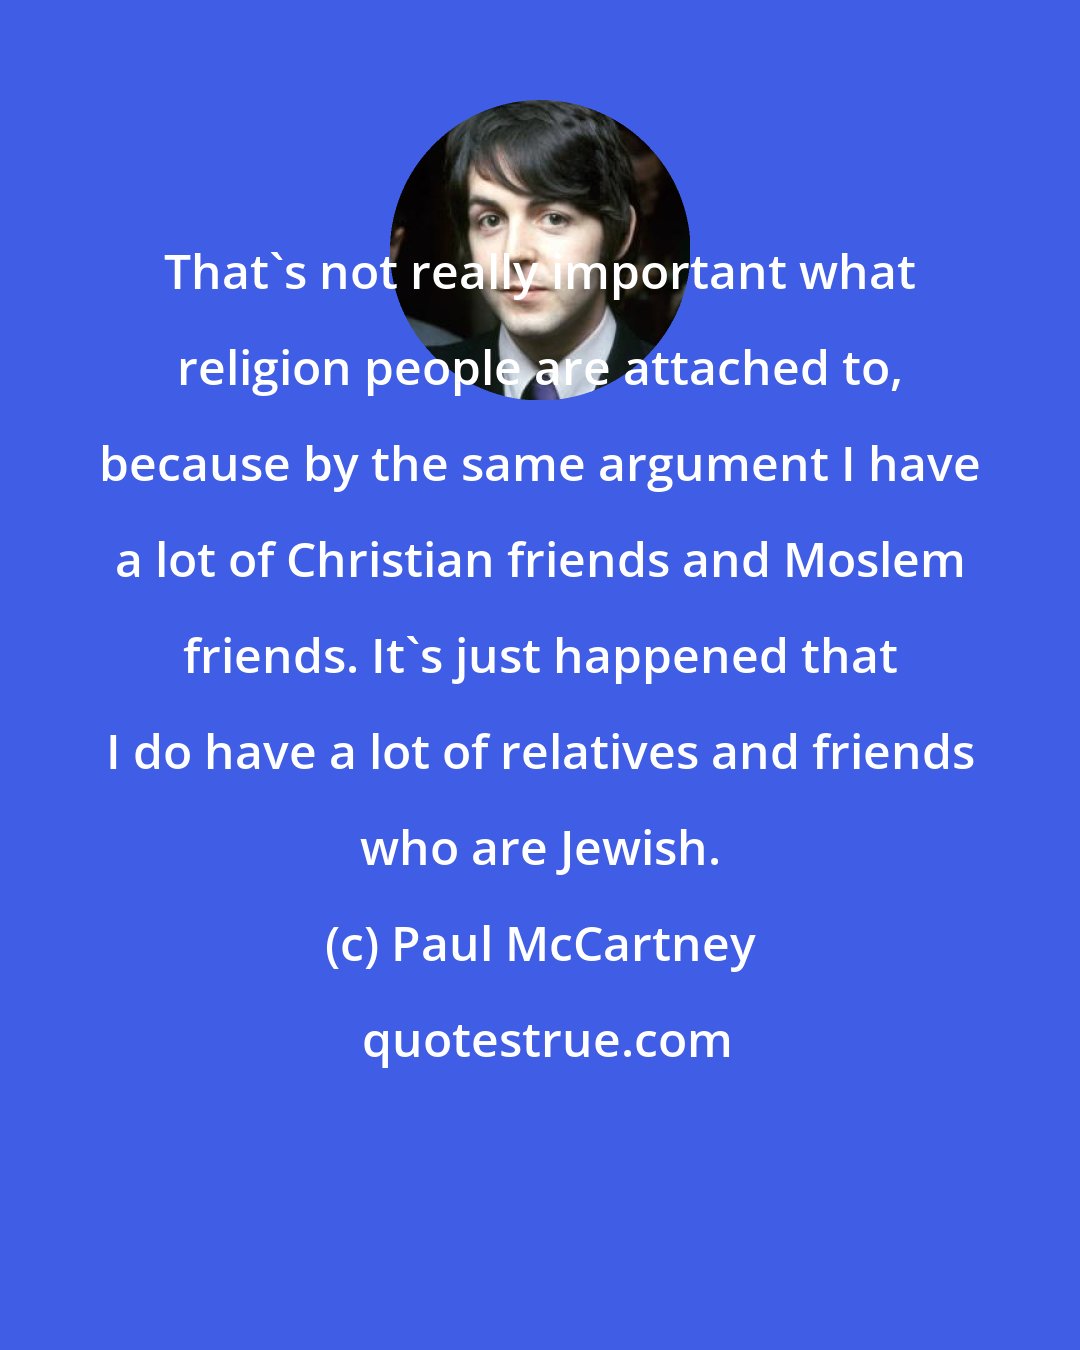 Paul McCartney: That's not really important what religion people are attached to, because by the same argument I have a lot of Christian friends and Moslem friends. It's just happened that I do have a lot of relatives and friends who are Jewish.